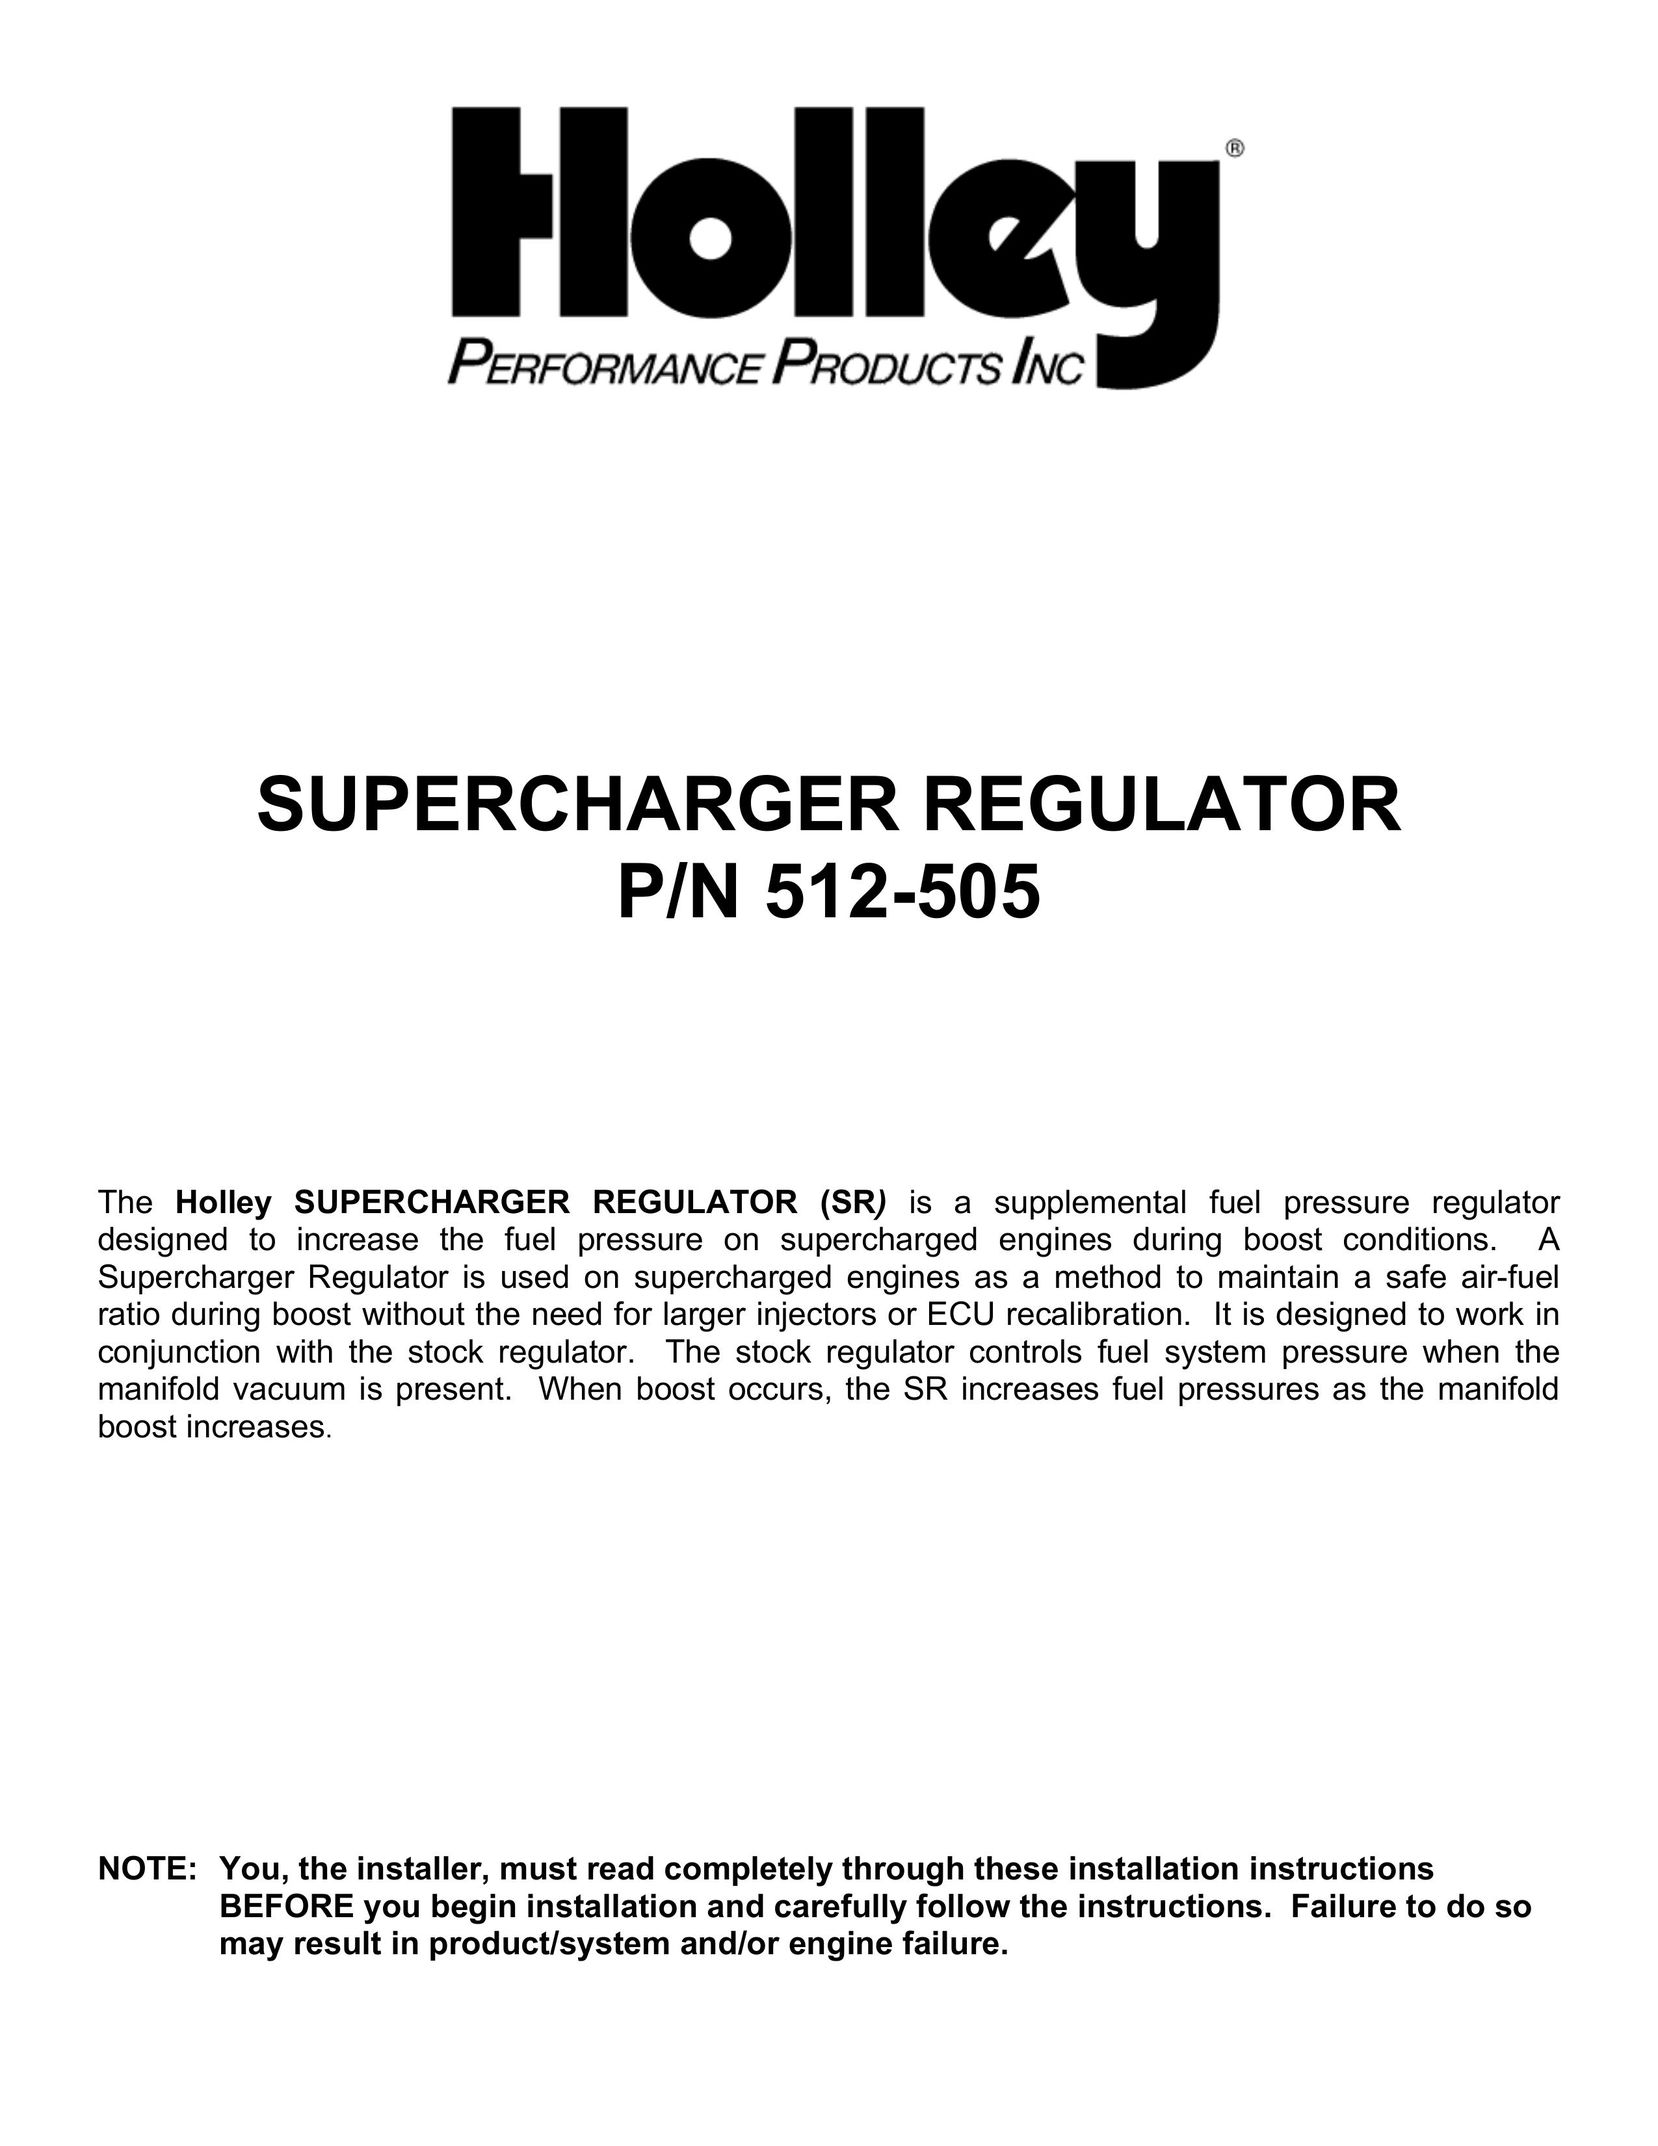 Holley P/N 512-505 Thermostat User Manual